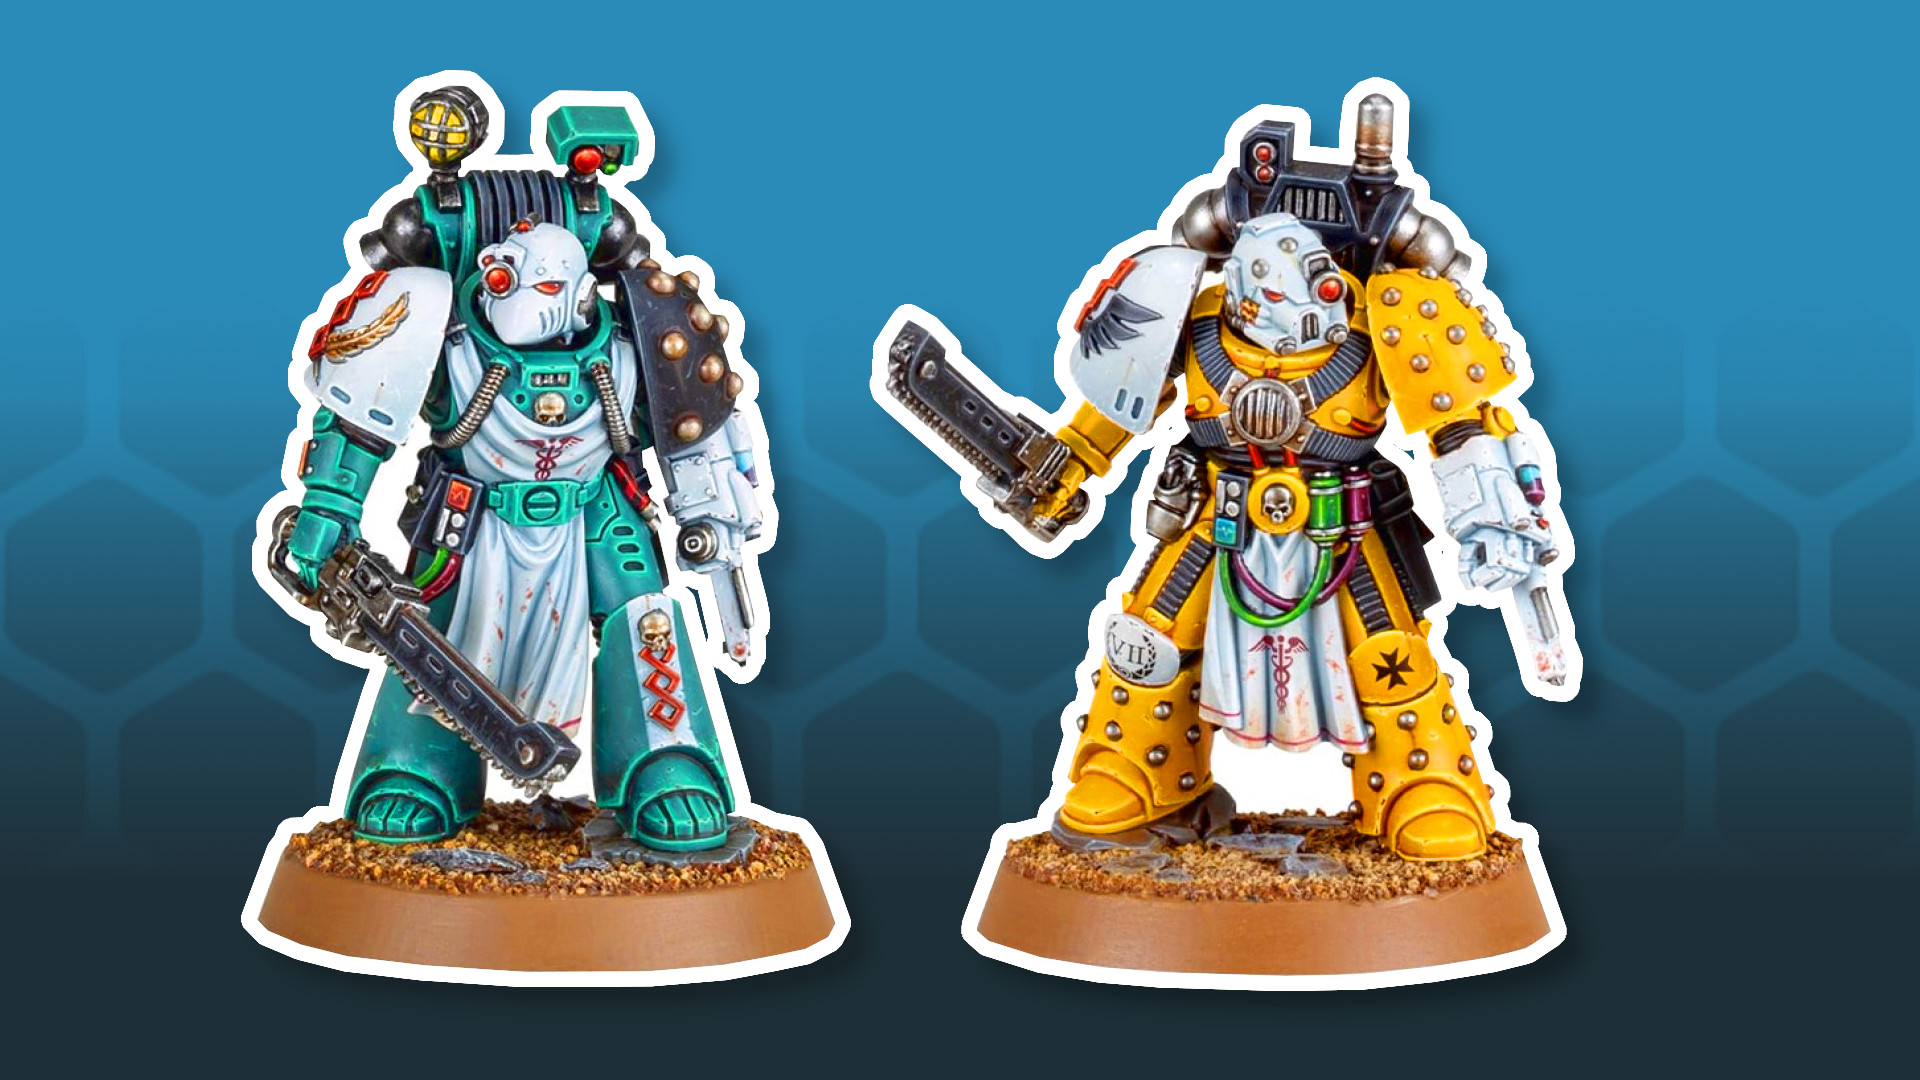 Warhammer Horus Heresy adds two Space Marine Apothecary models